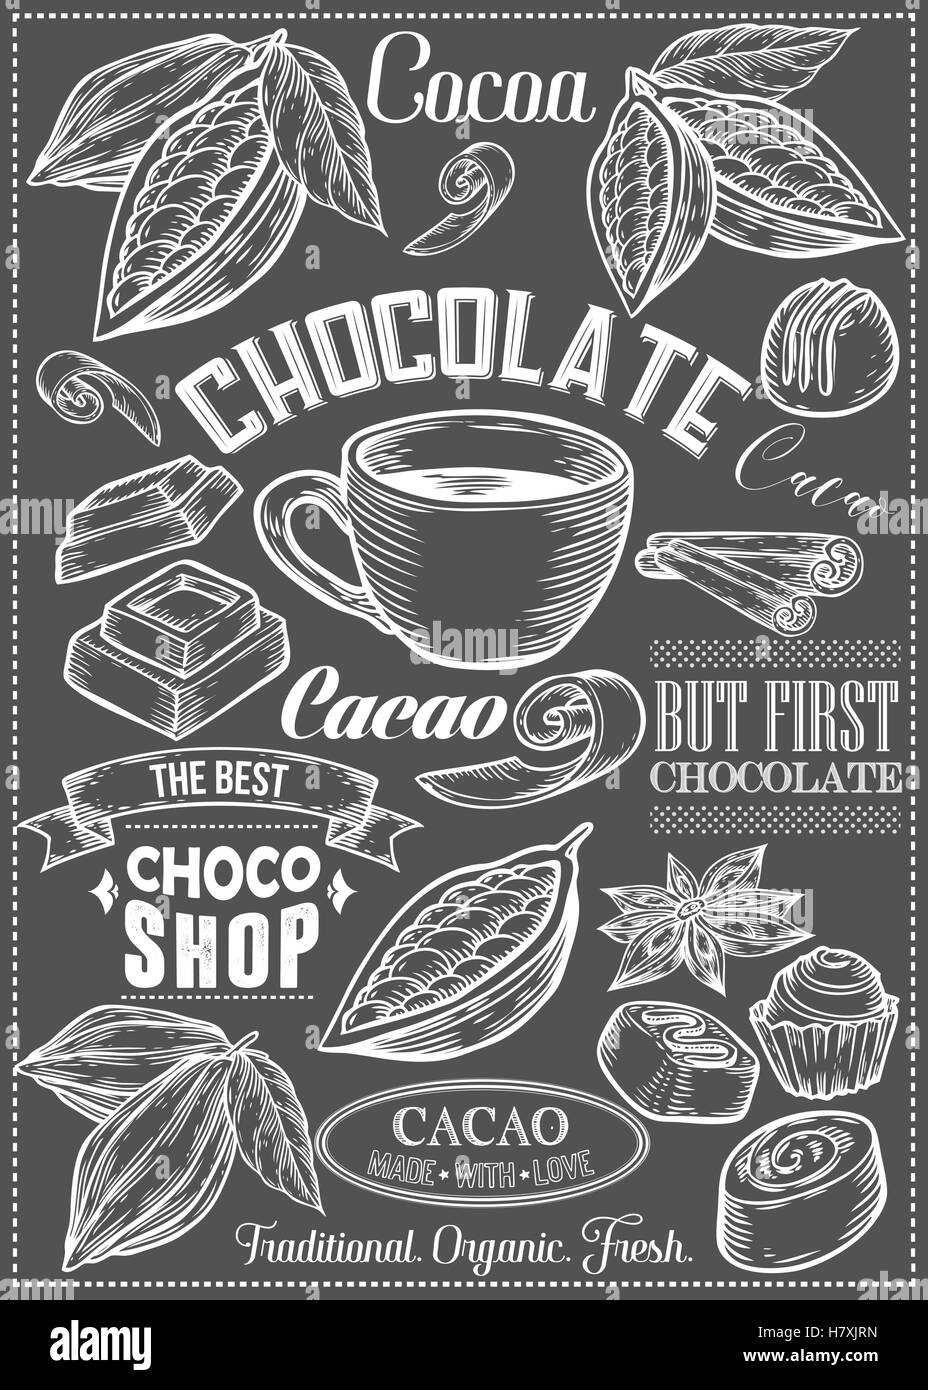 Cocoa, cacao, chocolate Vector set of Dessert Spices logos, labels, badges and design elements. Retro text. Vintage illustration Stock Vector